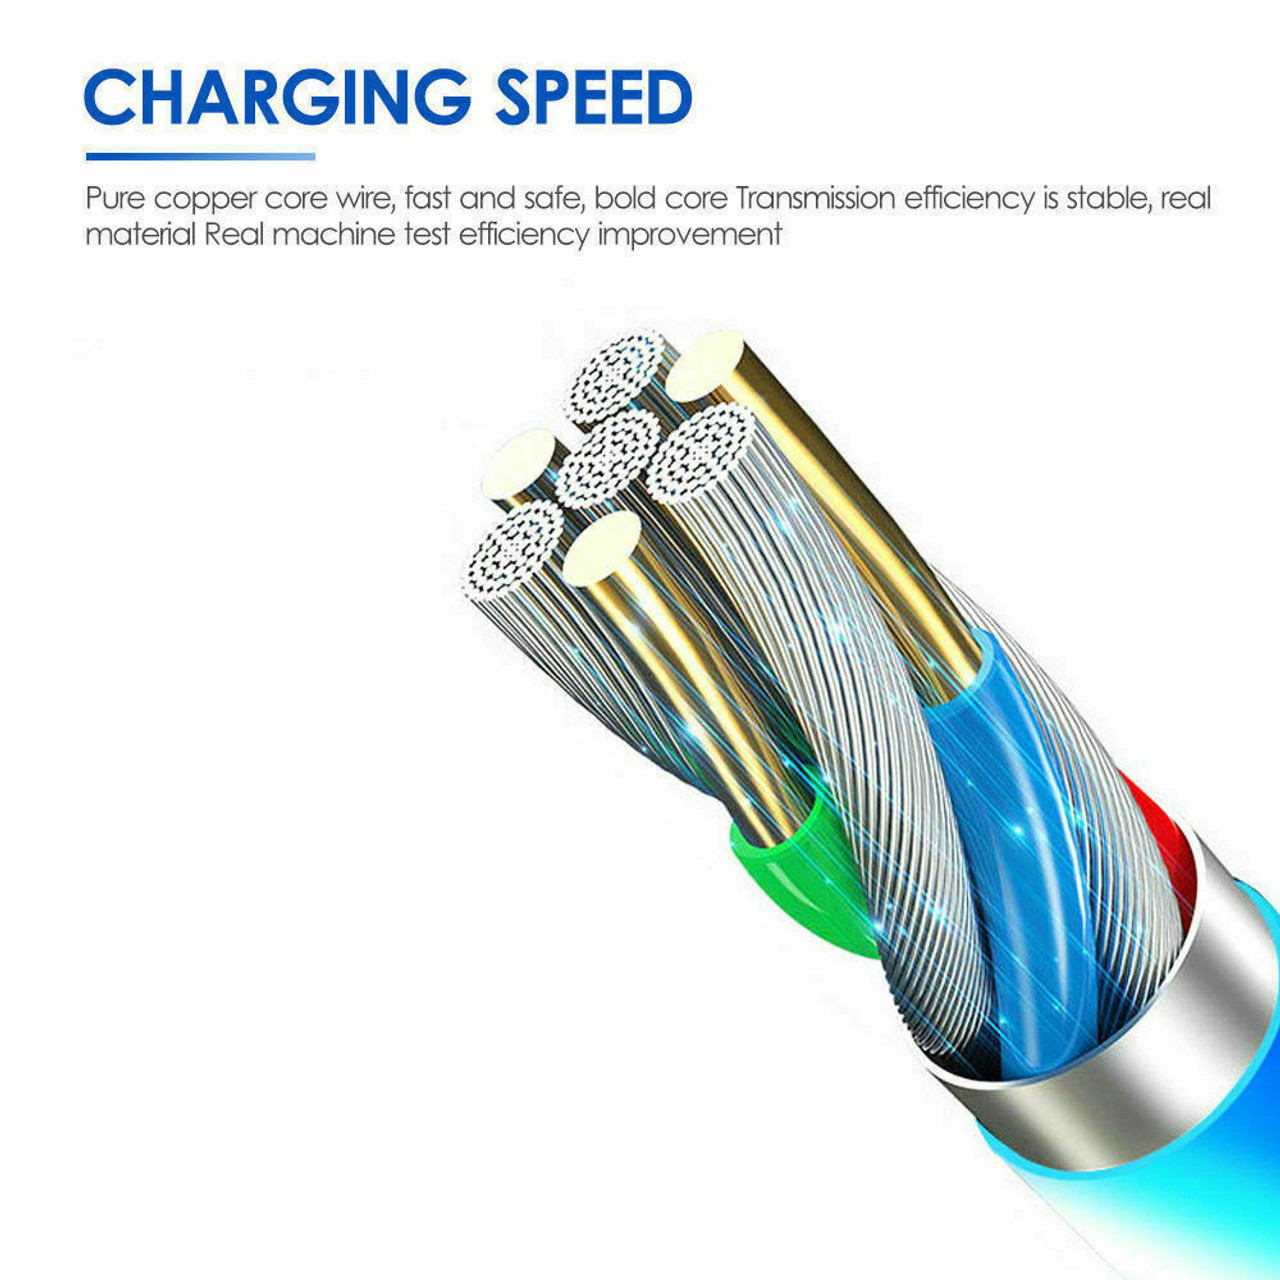 LED Fast Charging USB Charger Cable For iPhone 12/11 + Pro/XS Max/XR/X/8/7 8 PIN